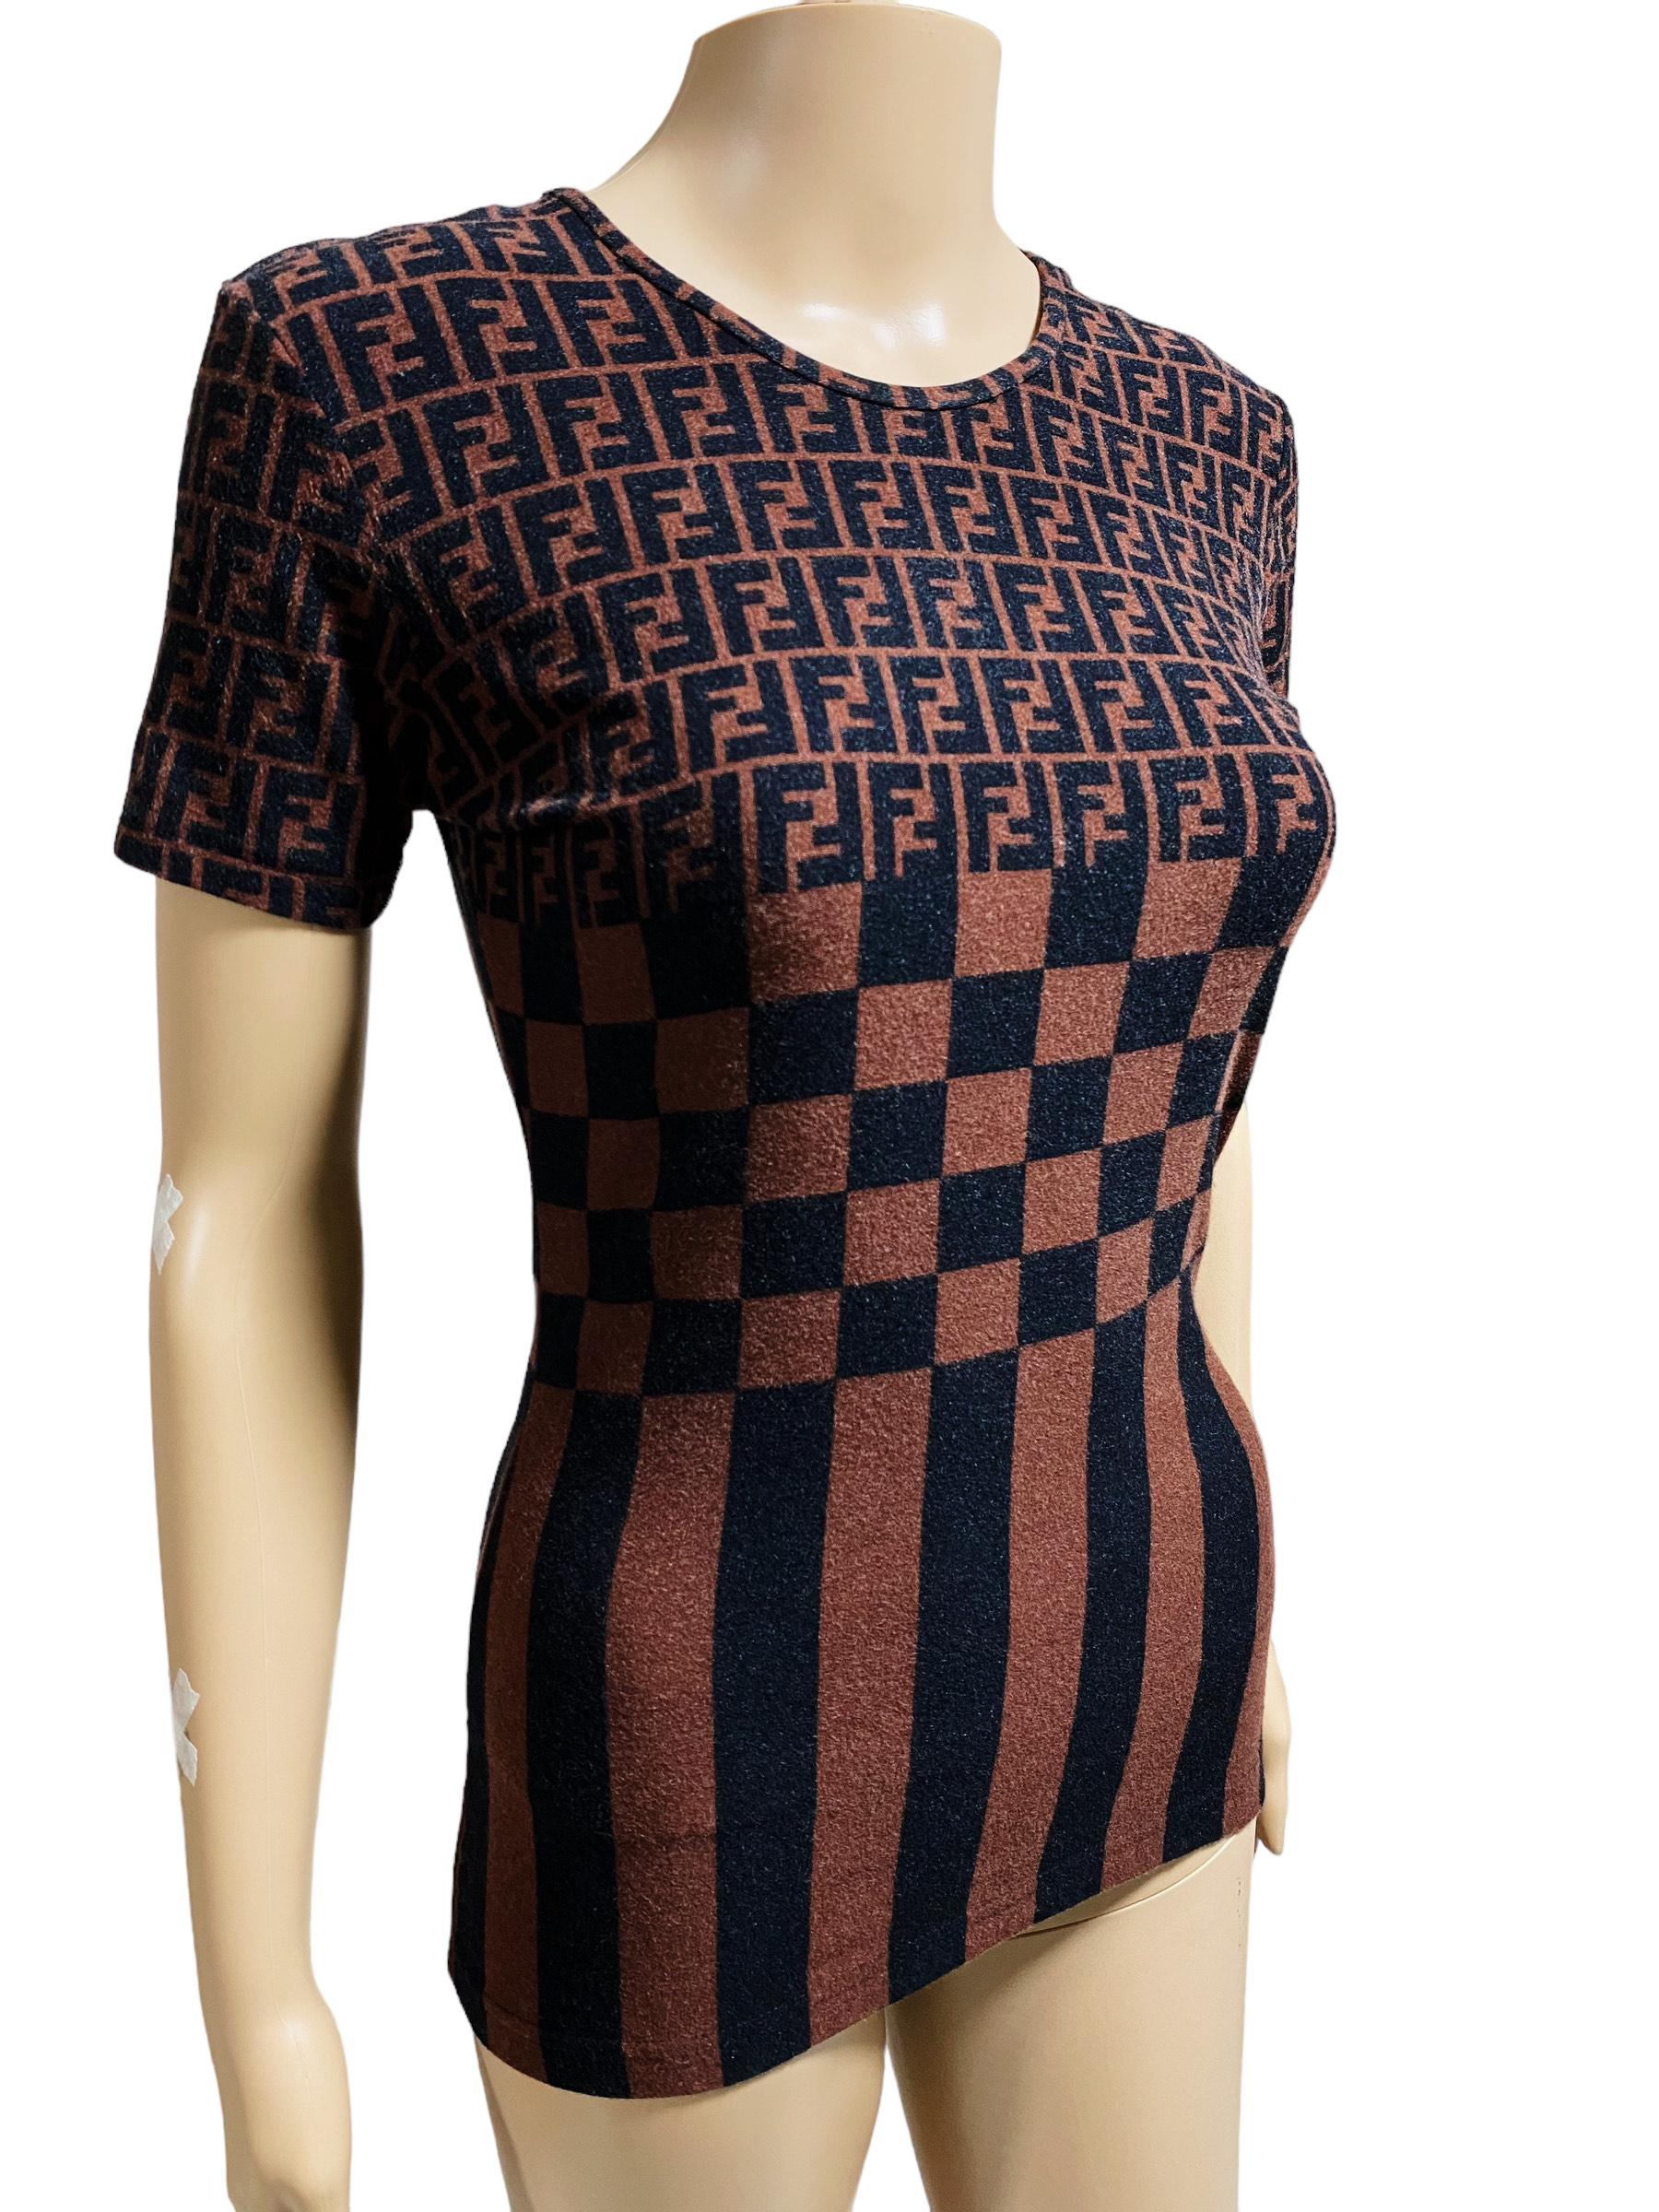 Women's or Men's Rare and Vintage Fendi Mare - Zucca Monogram T-shirt For Sale